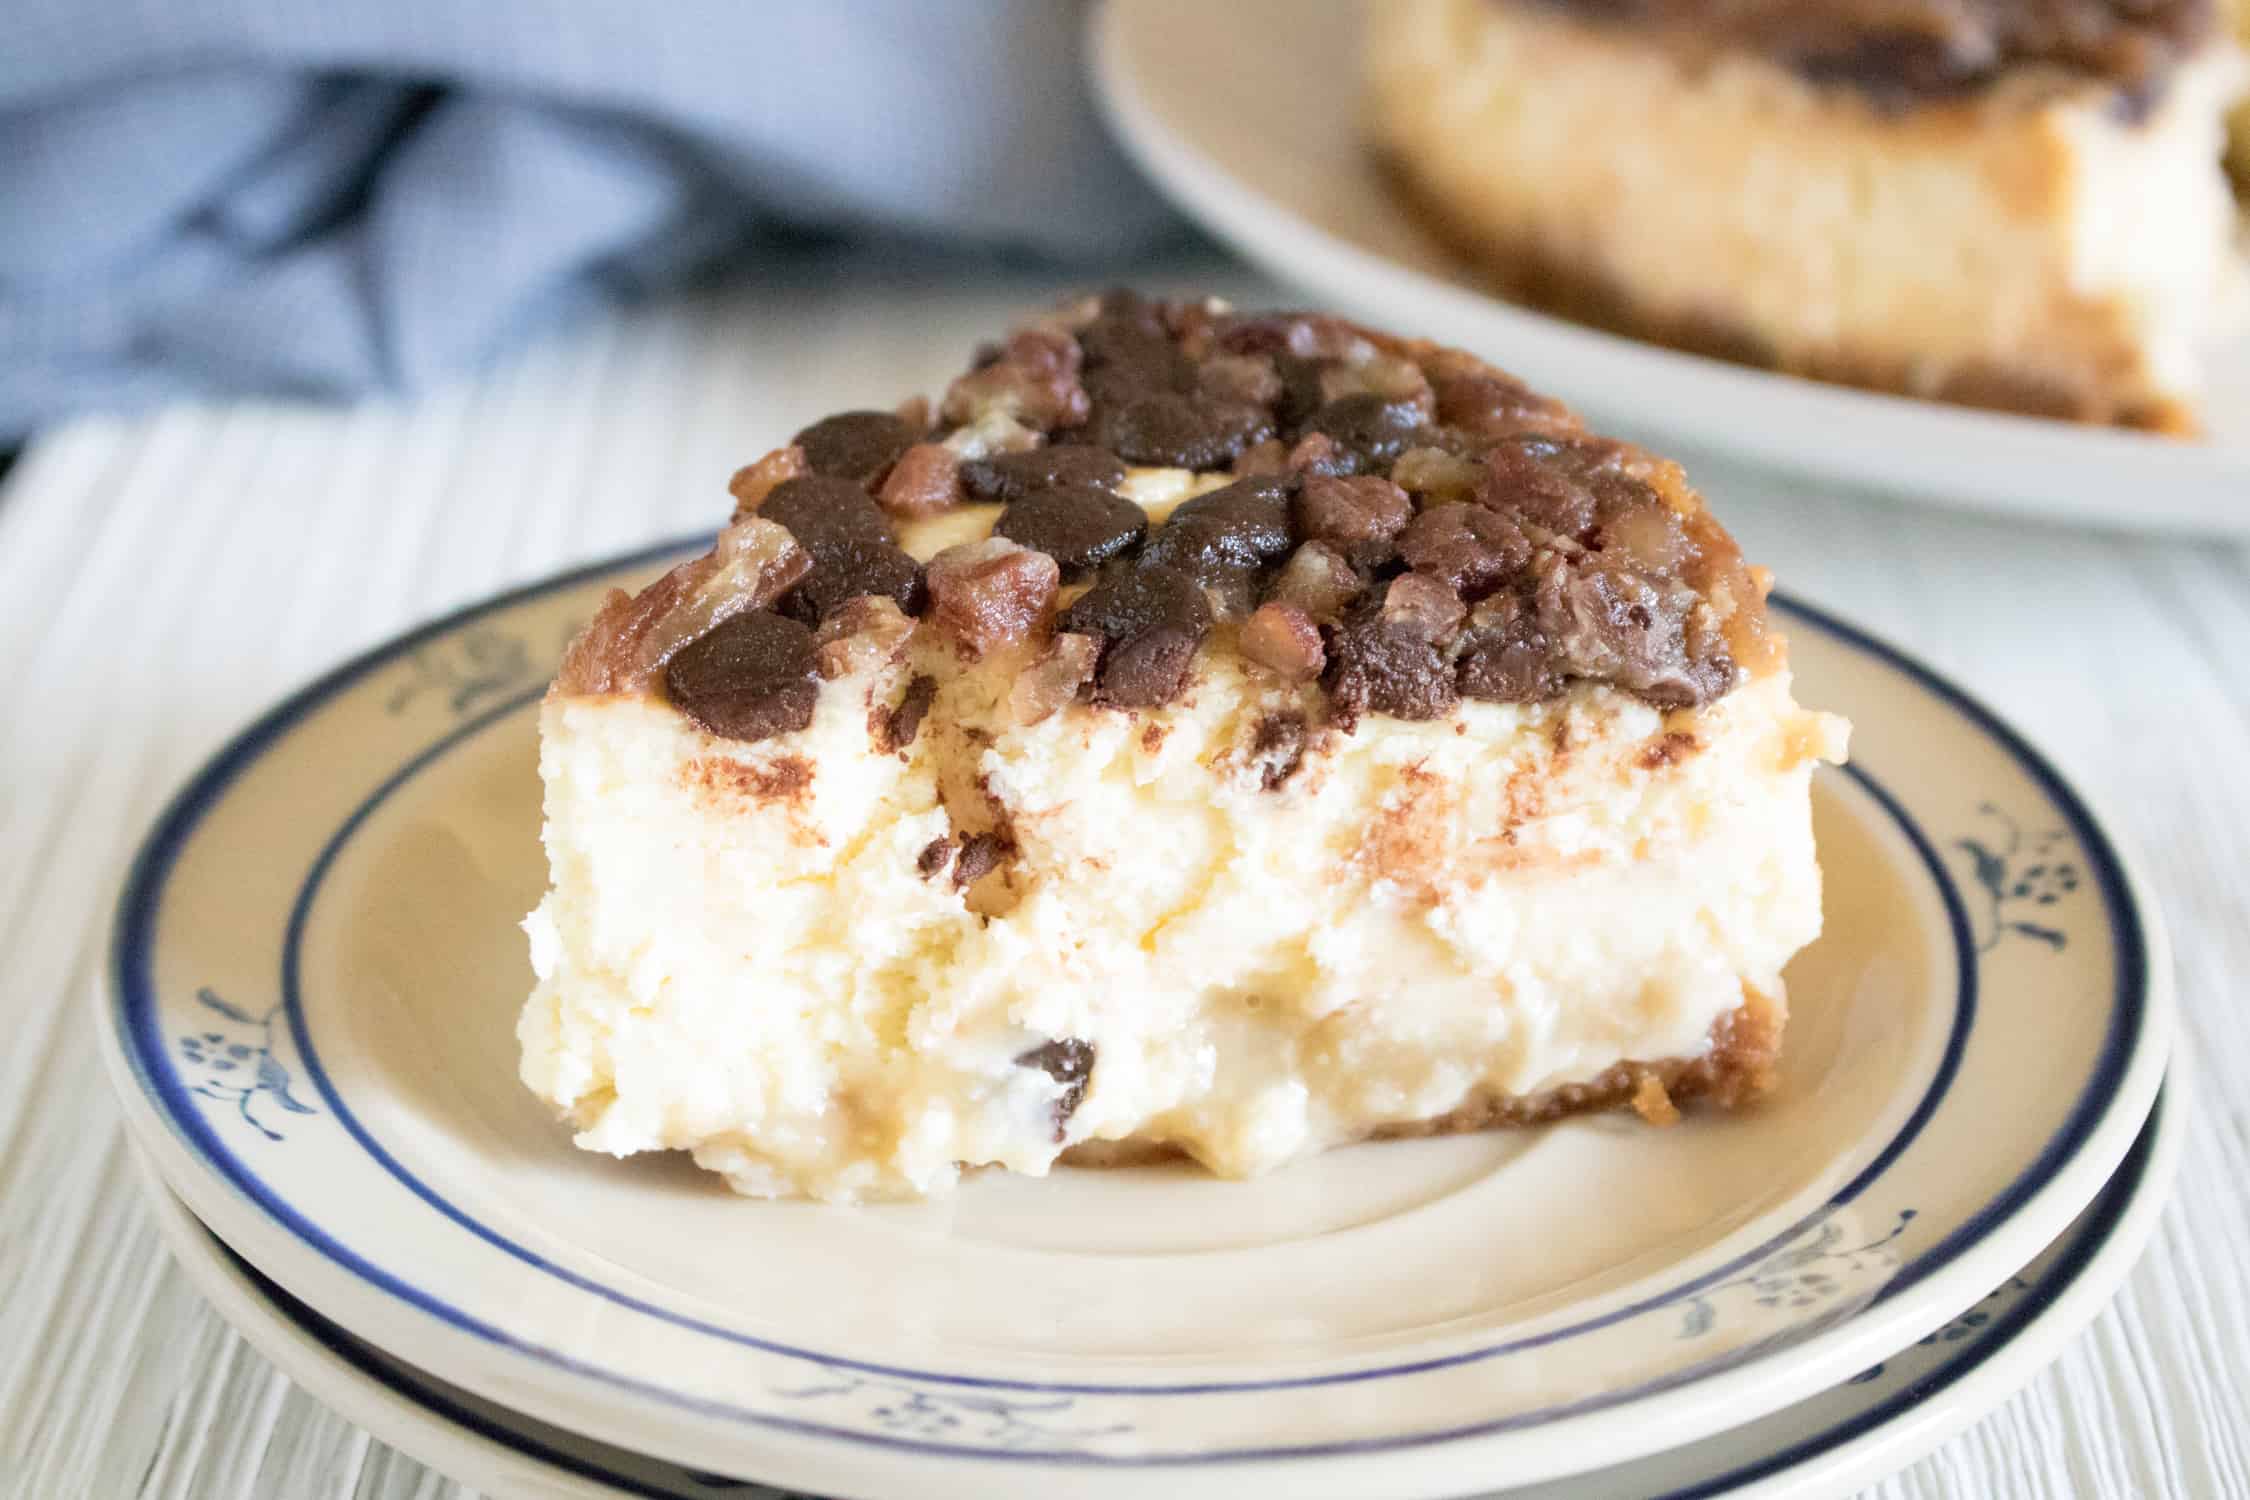 One slice of Instant Pot Pecan Cheesecake with Chocolate Chips on white plate with blue flowers on it